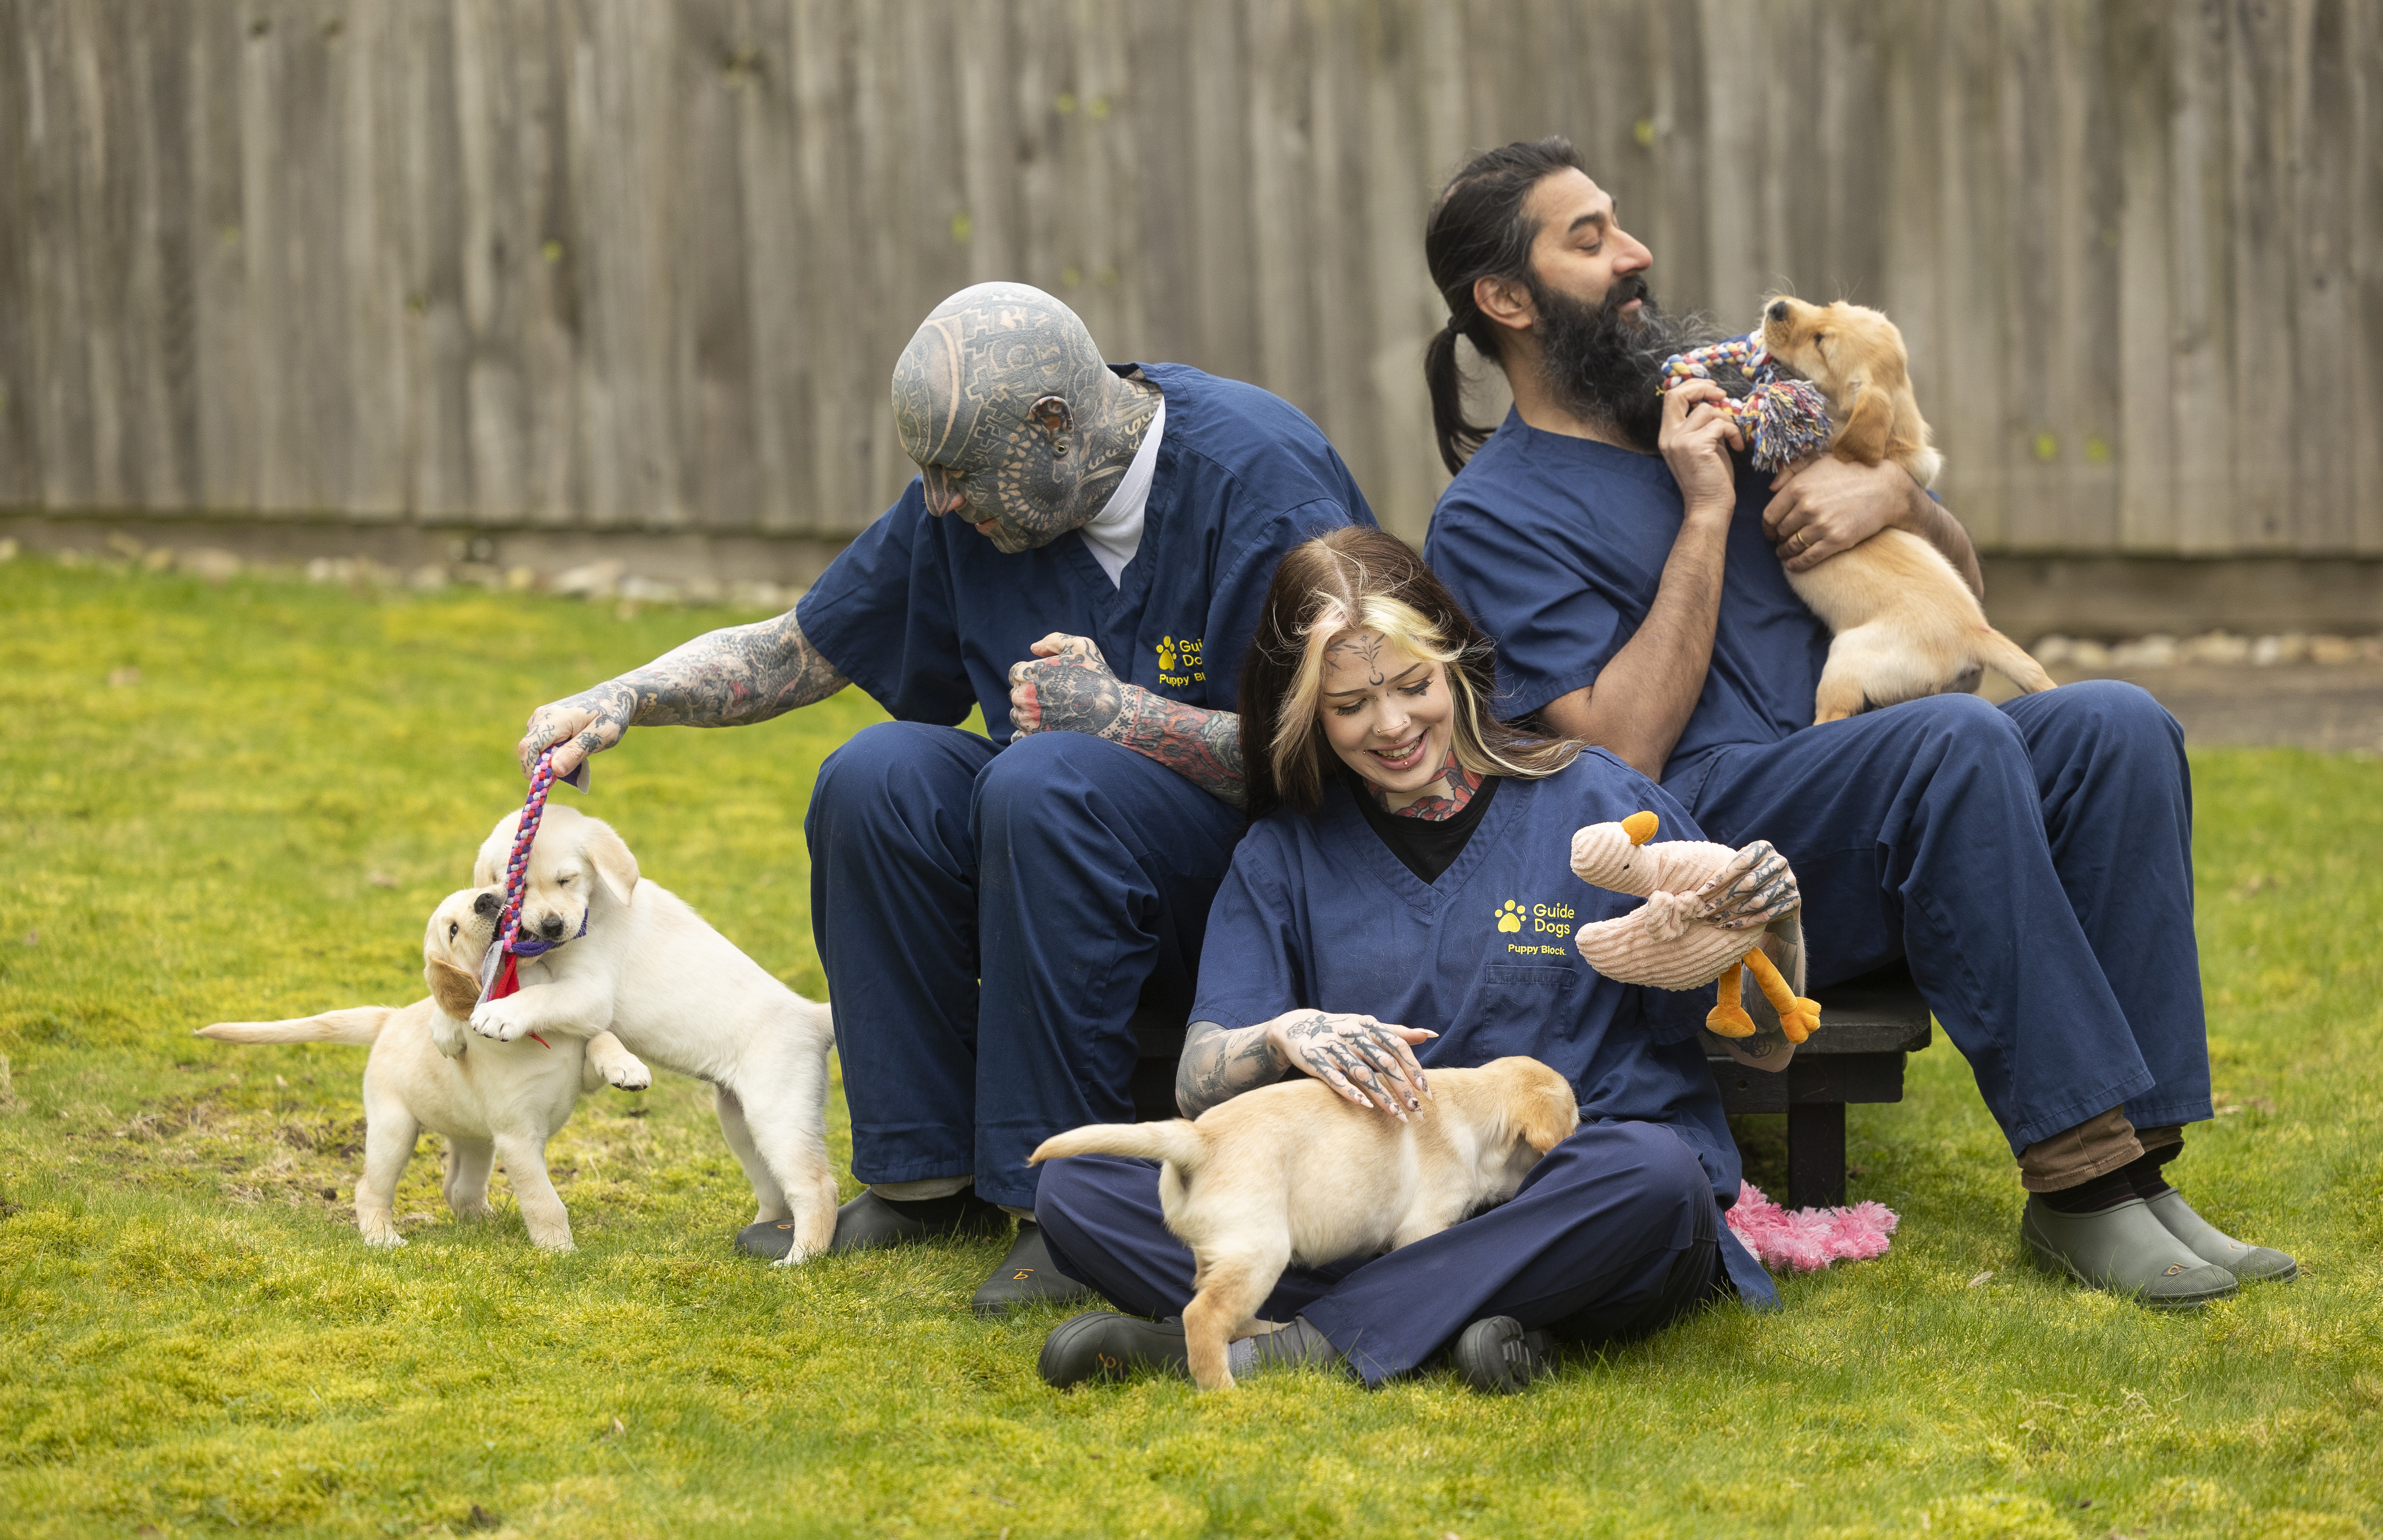 Three people sitting in a row, from left to right, a man with lots of facial tattoos, a woman with facial tattoos and piercings and another man with long hair and a very long beard. All are wearing blue Guide Dogs branded scrubs. The first man is holding a toy for two young guide dog puppies (yellow Labradors) to play with. The woman holds a yellow Labrador puppy in her lap and is also holding a stuffed duck. The last man is holding a young yellow Labrador guide dog puppy on his lap, whilst holding a stuffed toy that the puppy is playing with. 